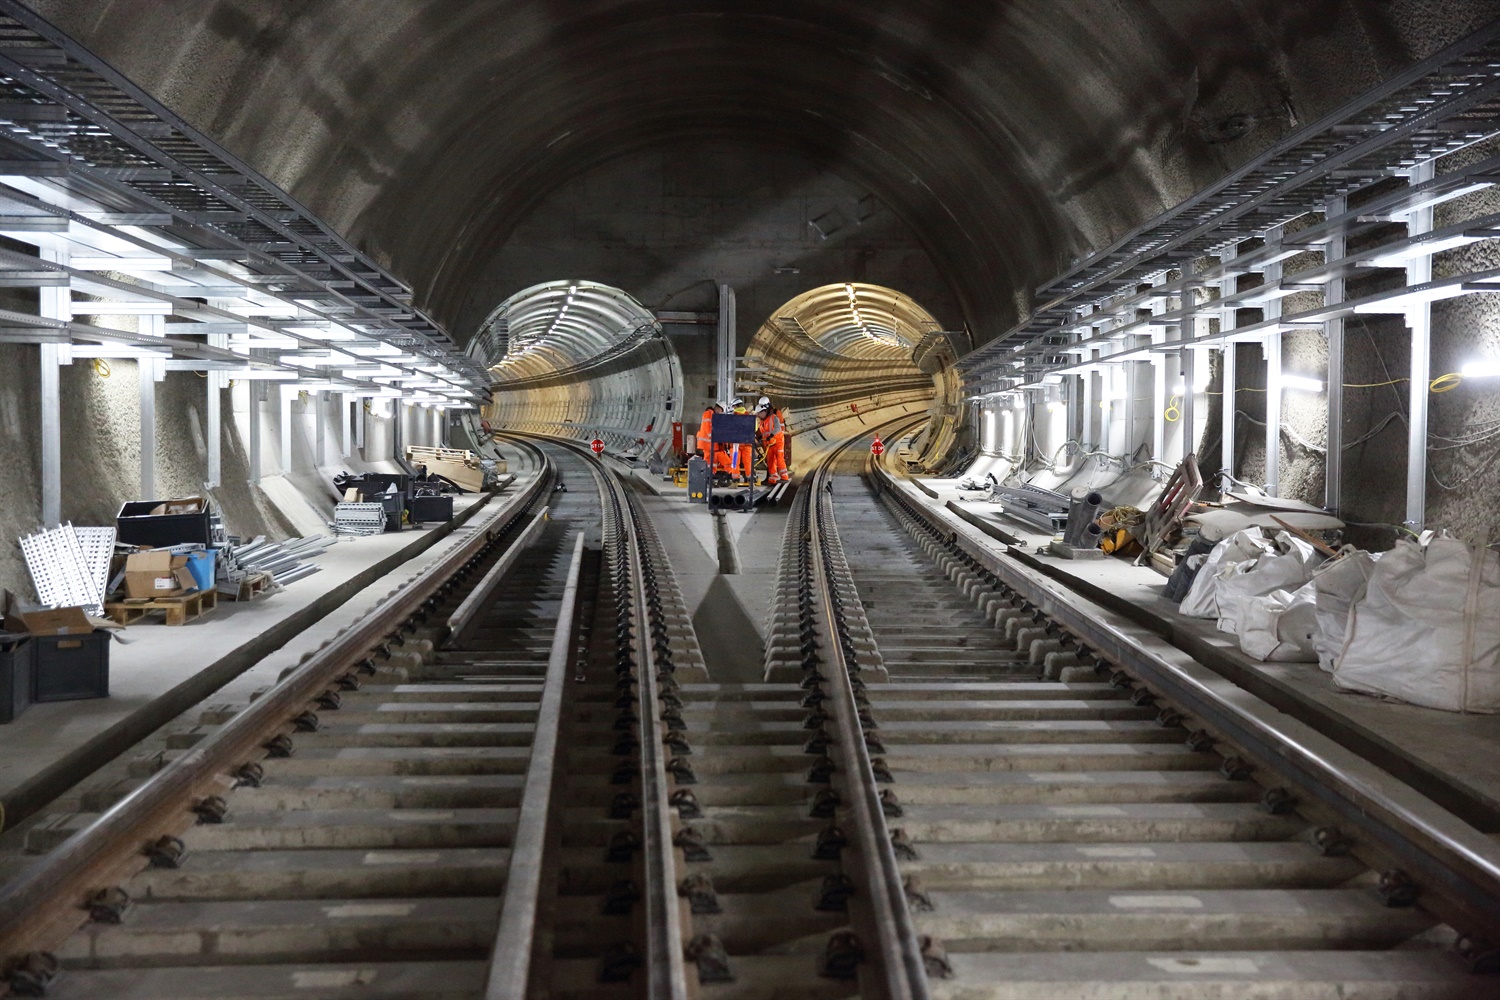 Crossrail unveils new pictures showing progress with tunnel fit-out work